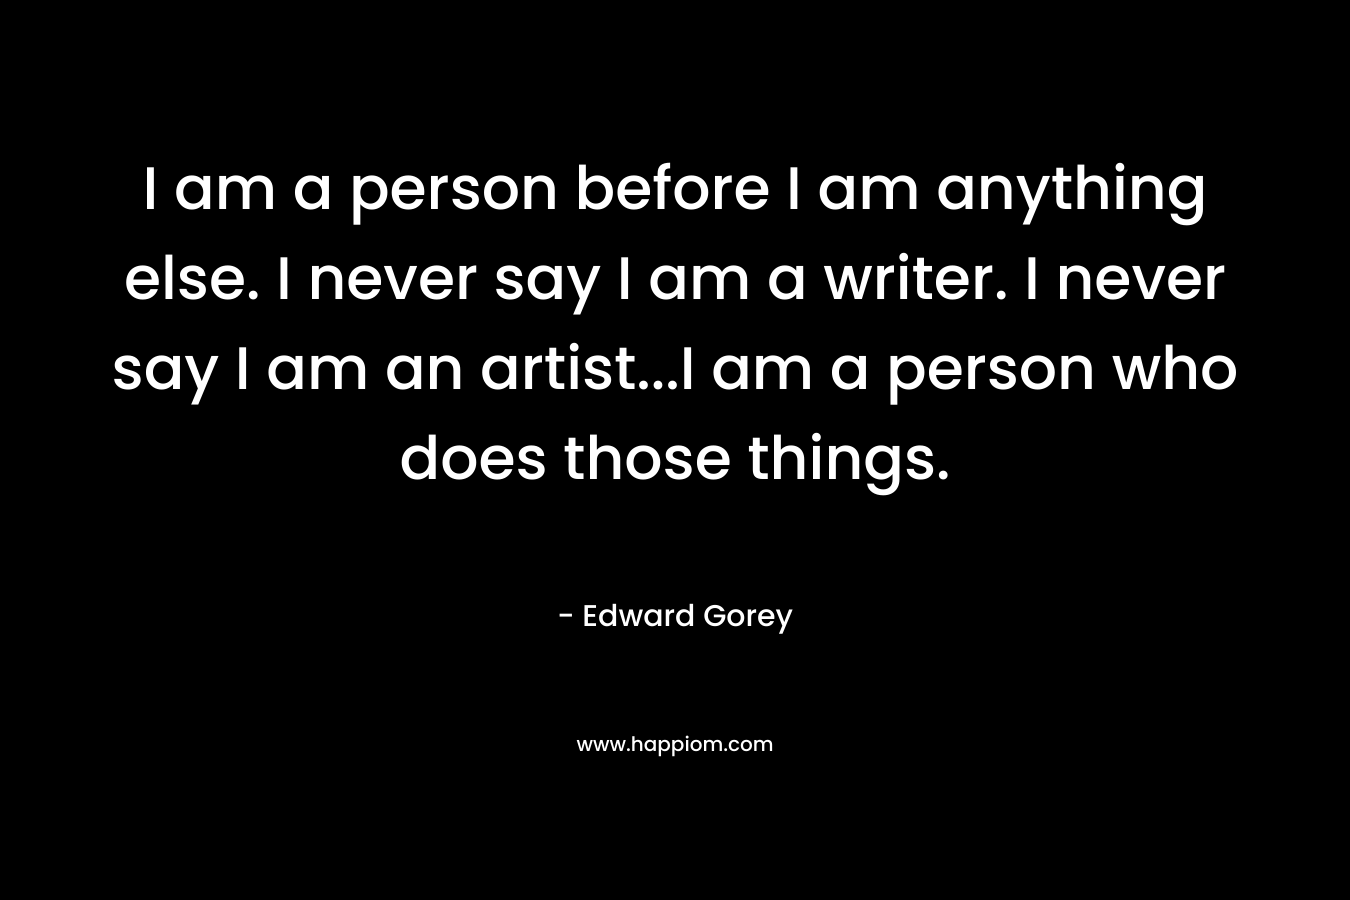 I am a person before I am anything else. I never say I am a writer. I never say I am an artist...I am a person who does those things.